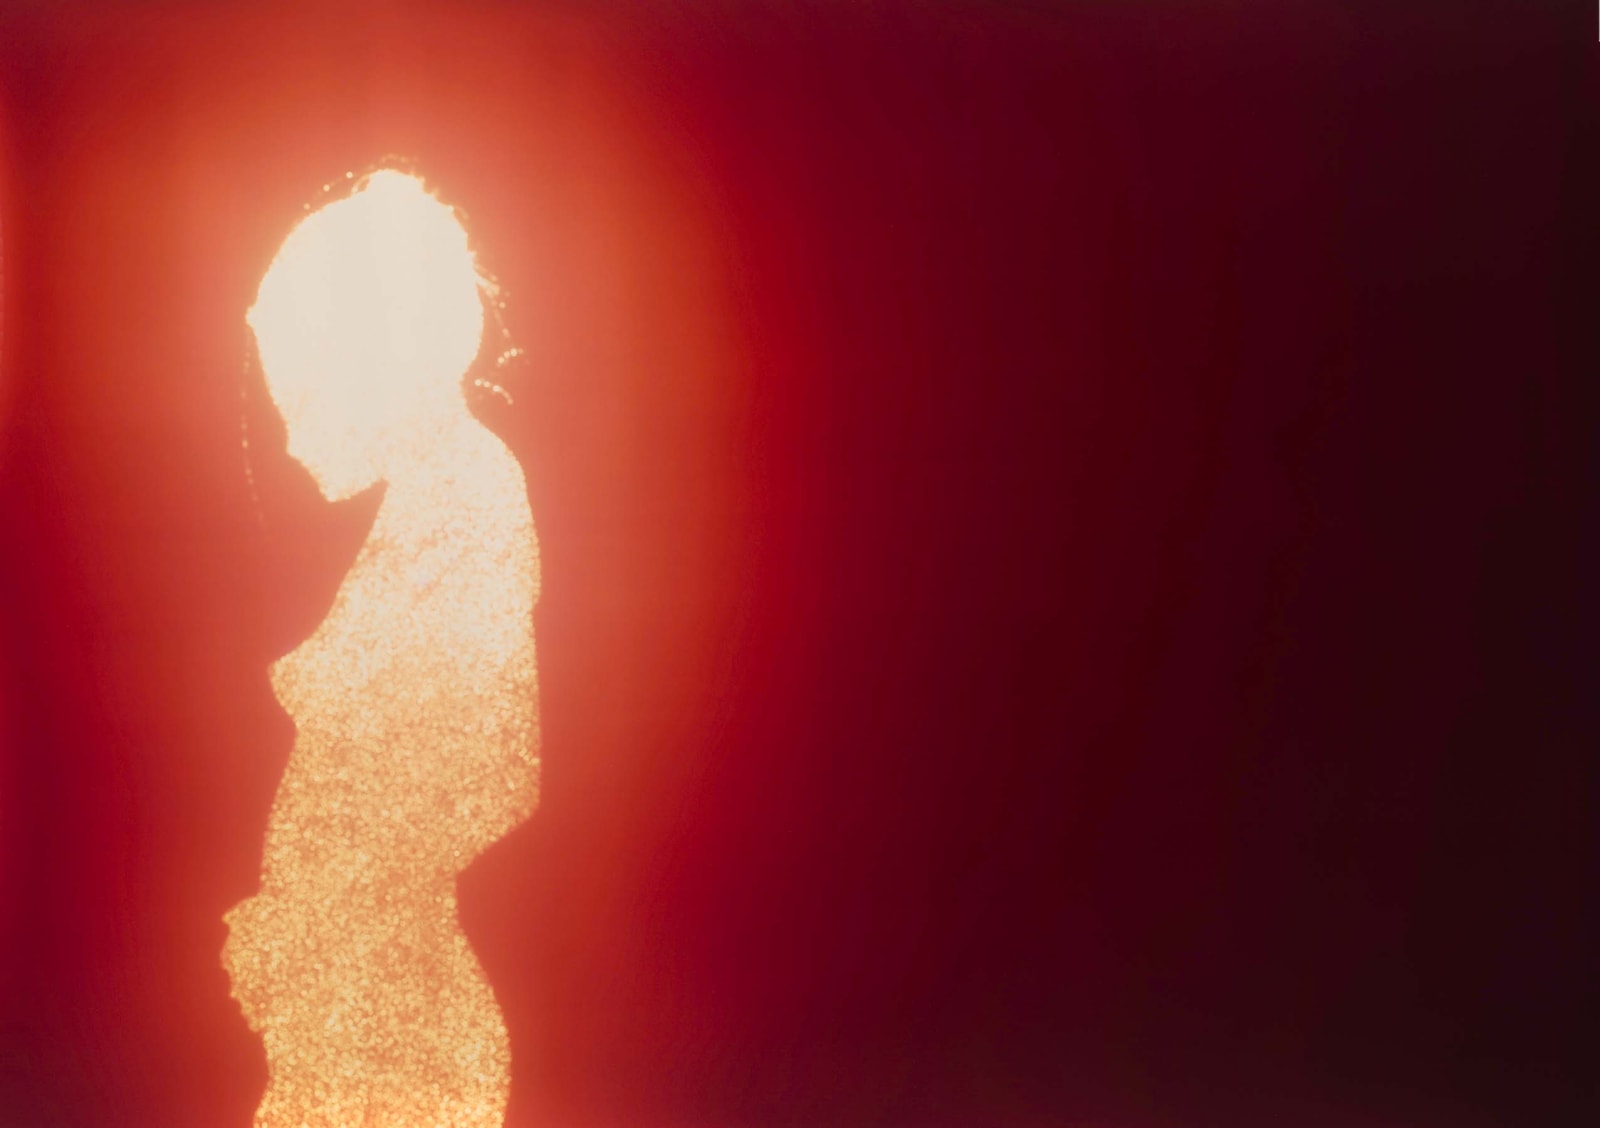 Christopher Bucklow Tetrarch, 1.31pm, 23rd June, 2010 nude female silhouette of light through red orange background